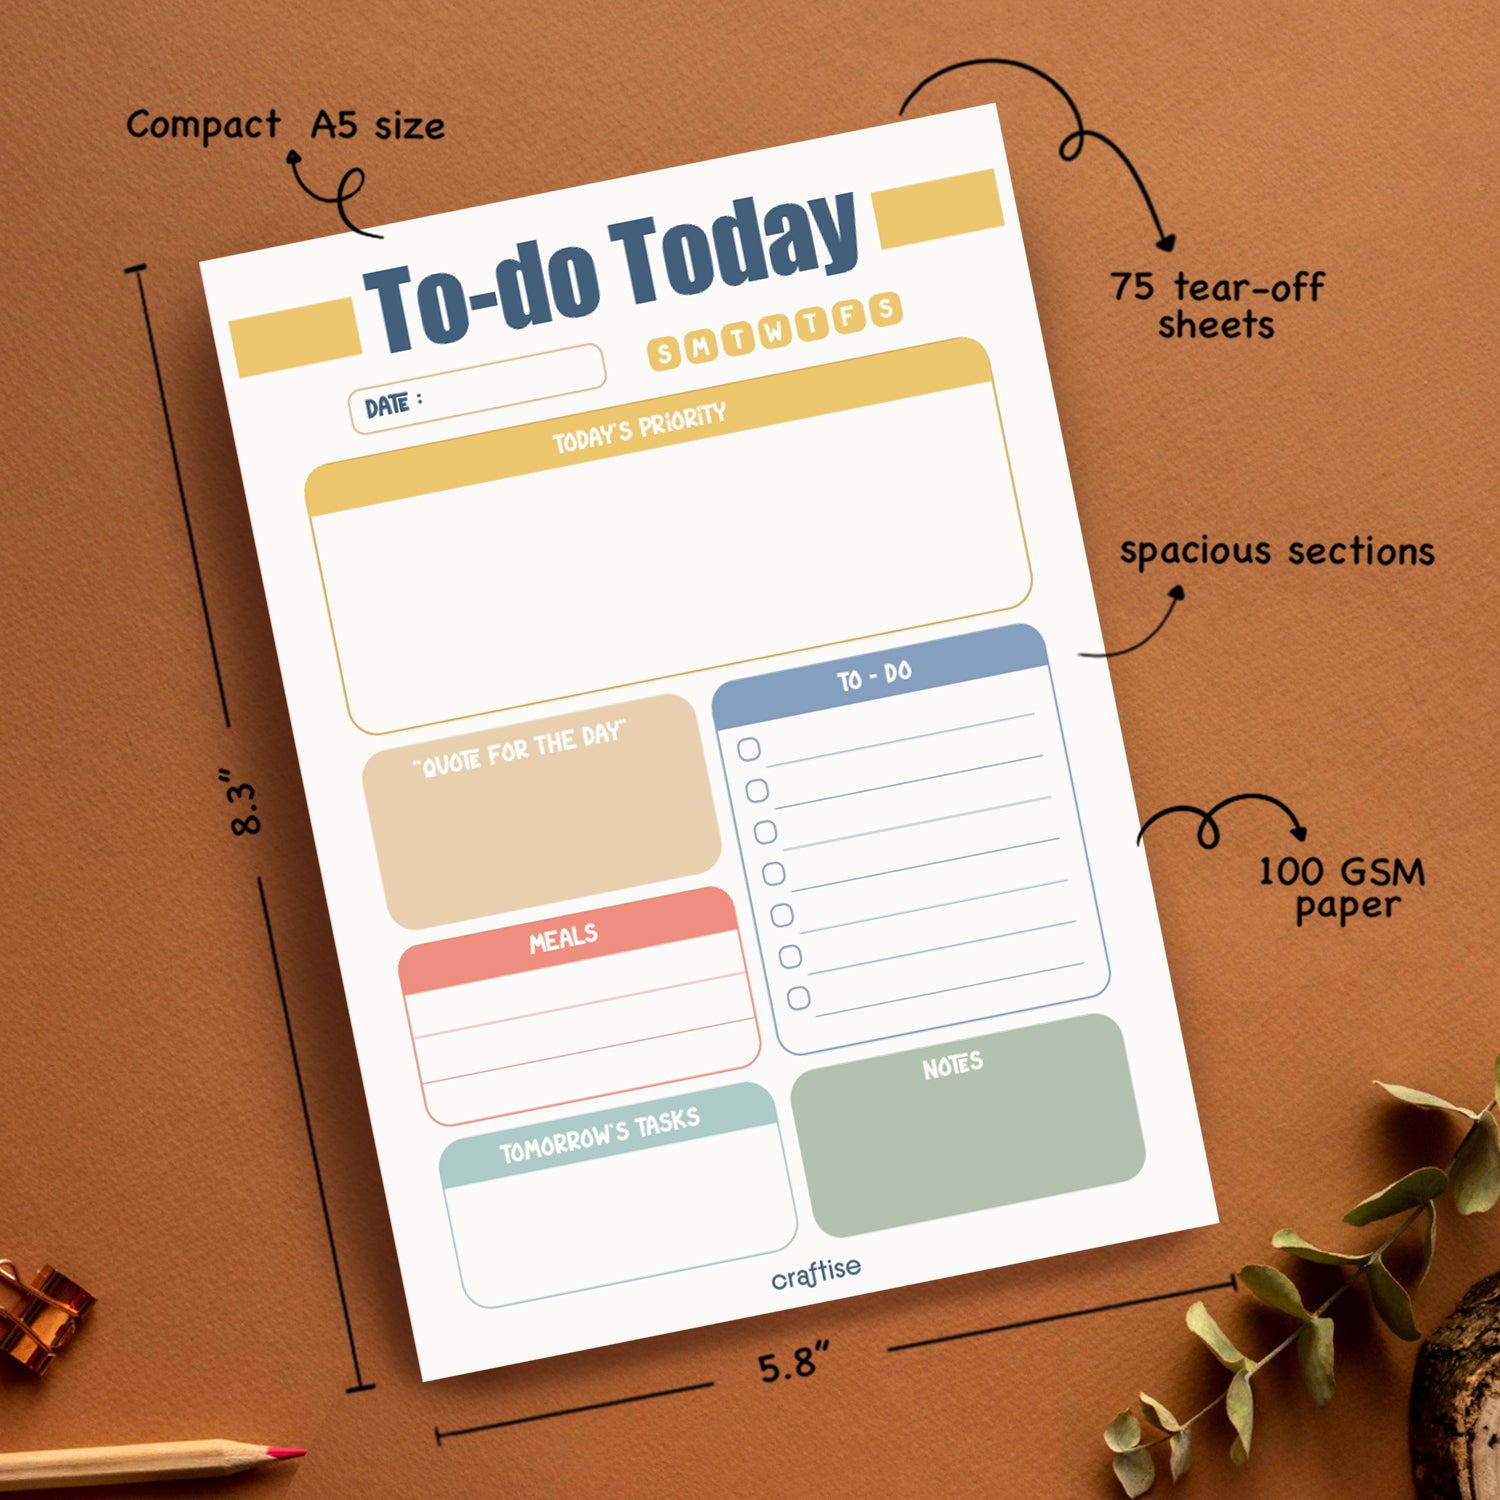 To-do Today Notepad